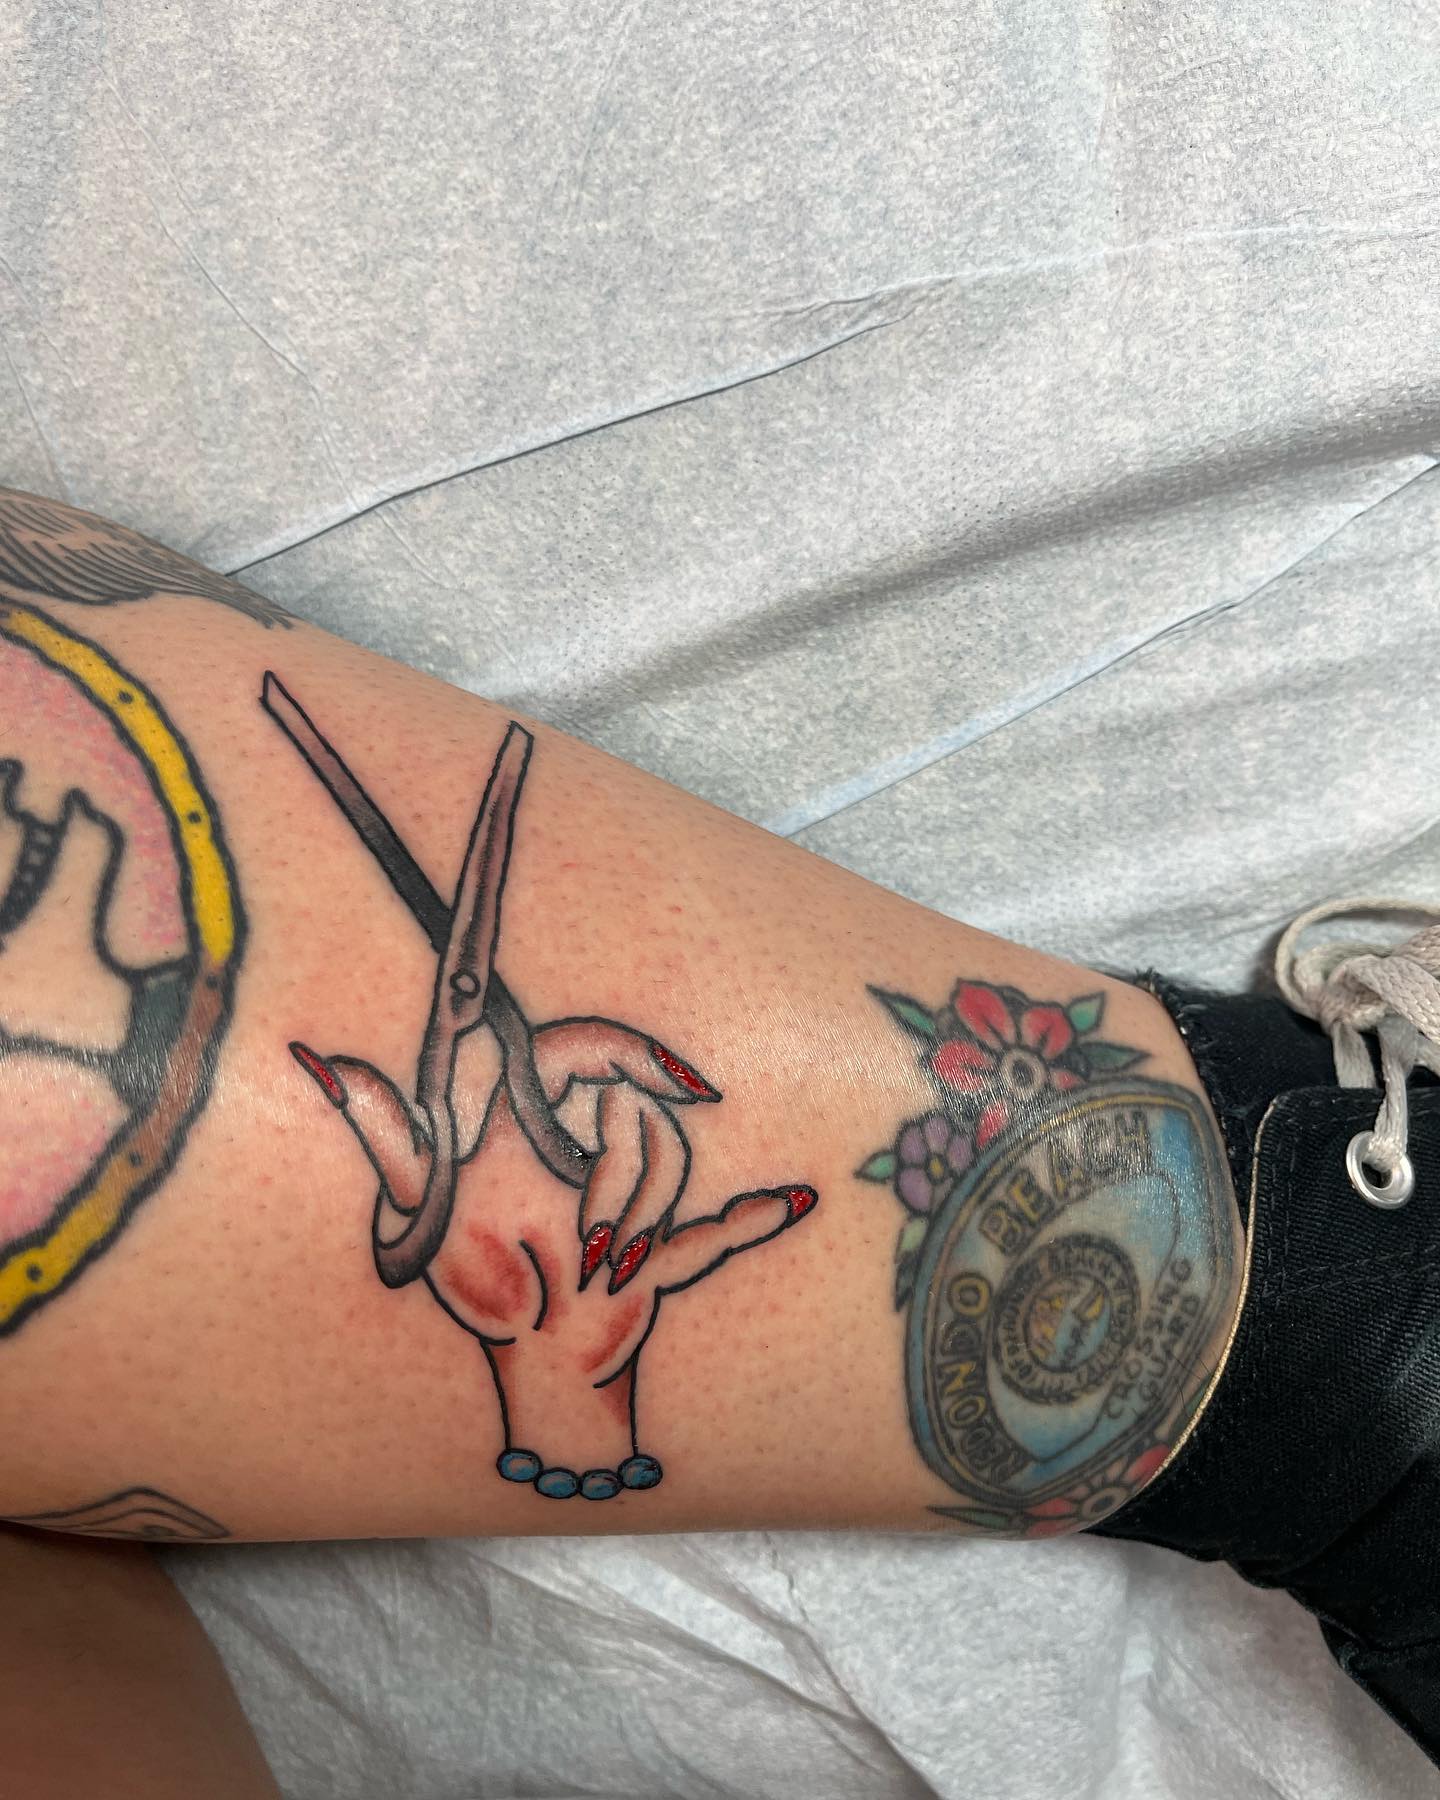 Got some fuckin cute new pieces 💉💖 by @kylieincolor